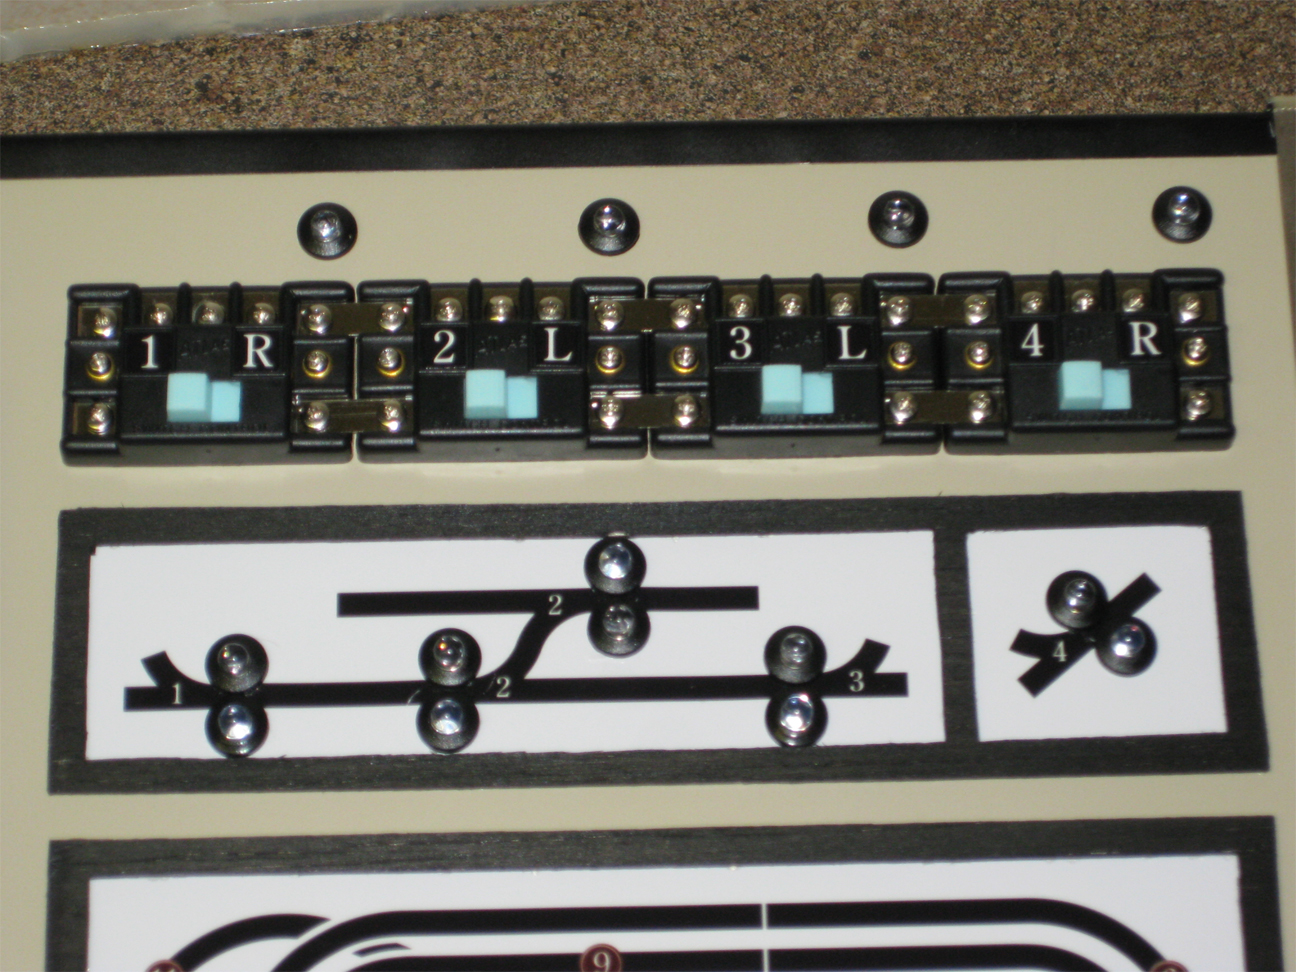 Control panel with Atlas switches and homemade letter labels installed along with turnout position LED indicator lights